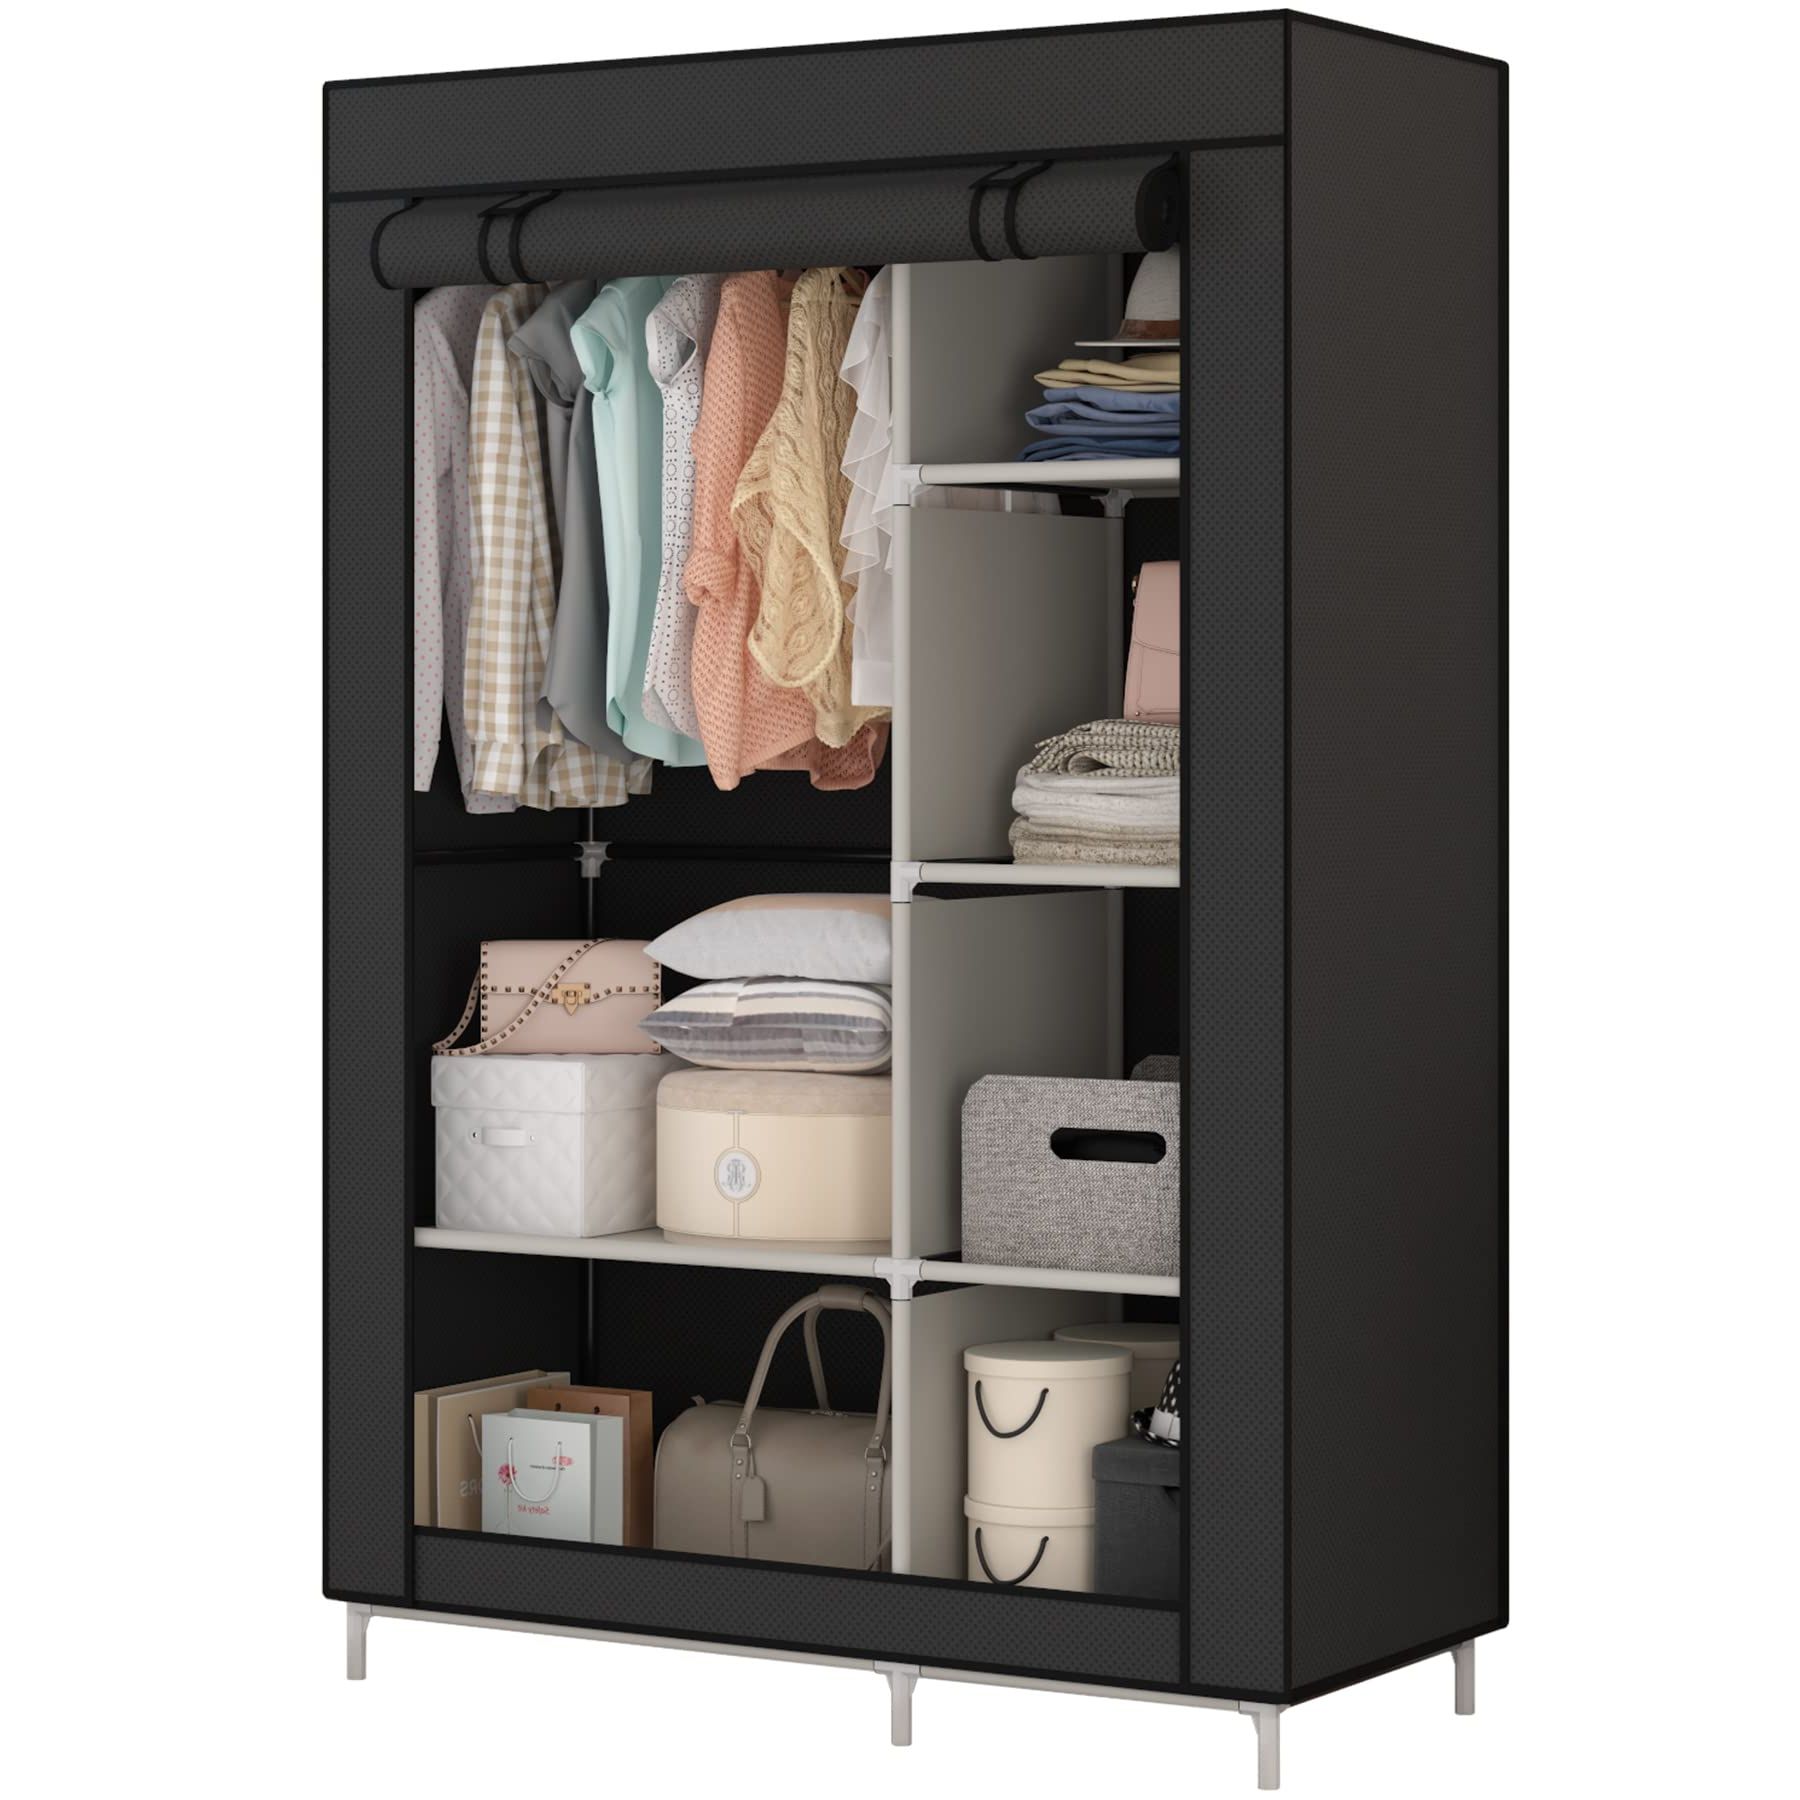 Latest Amazon: Calmootey Closet Storage Organizer,portable Wardrobe With 6  Shelves And Clothes Rod,non Woven Fabric Cover With 4 Side Pockets,black :  Home & Kitchen For 6 Shelf Non Woven Wardrobes (Photo 2 of 10)